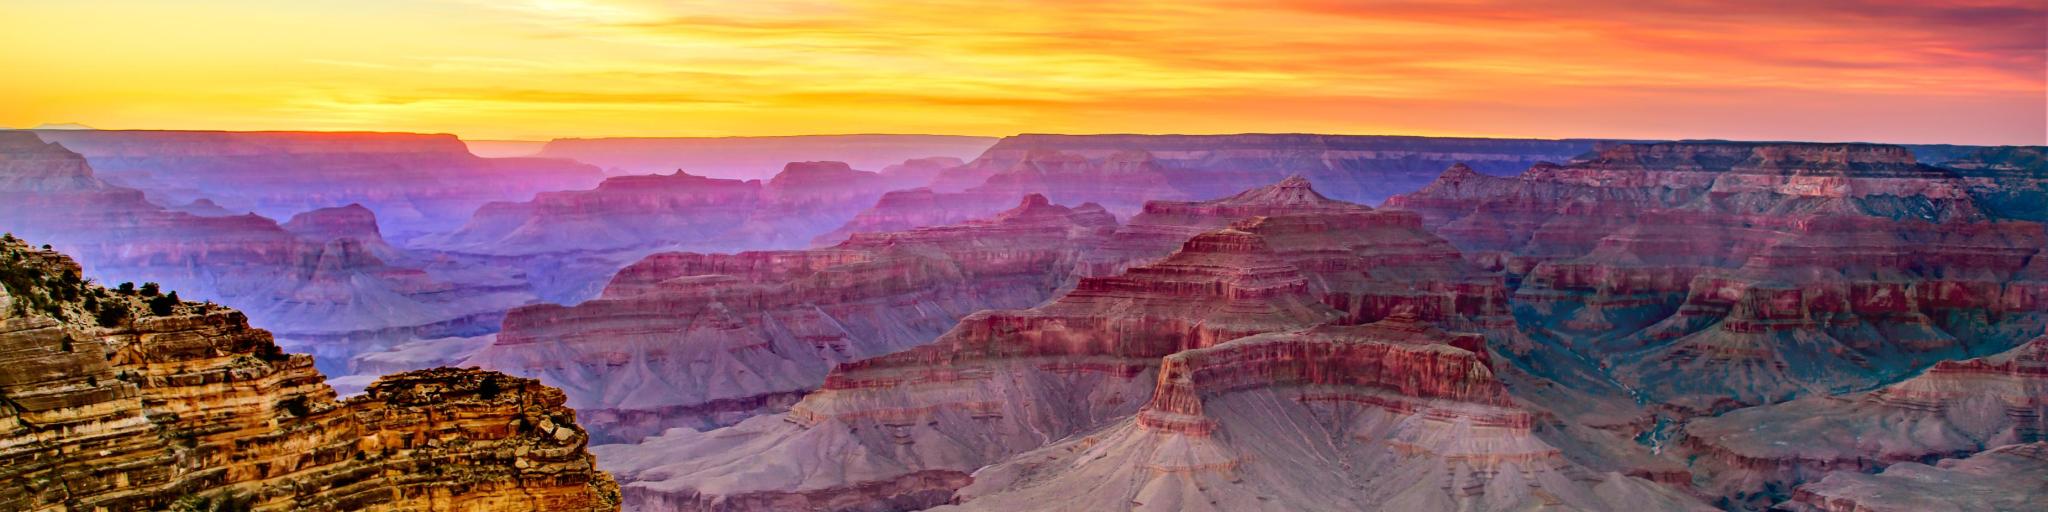 A view of the famous Grand Canyon South Rim at sunset, with a multicolored sky above the vast canyon below